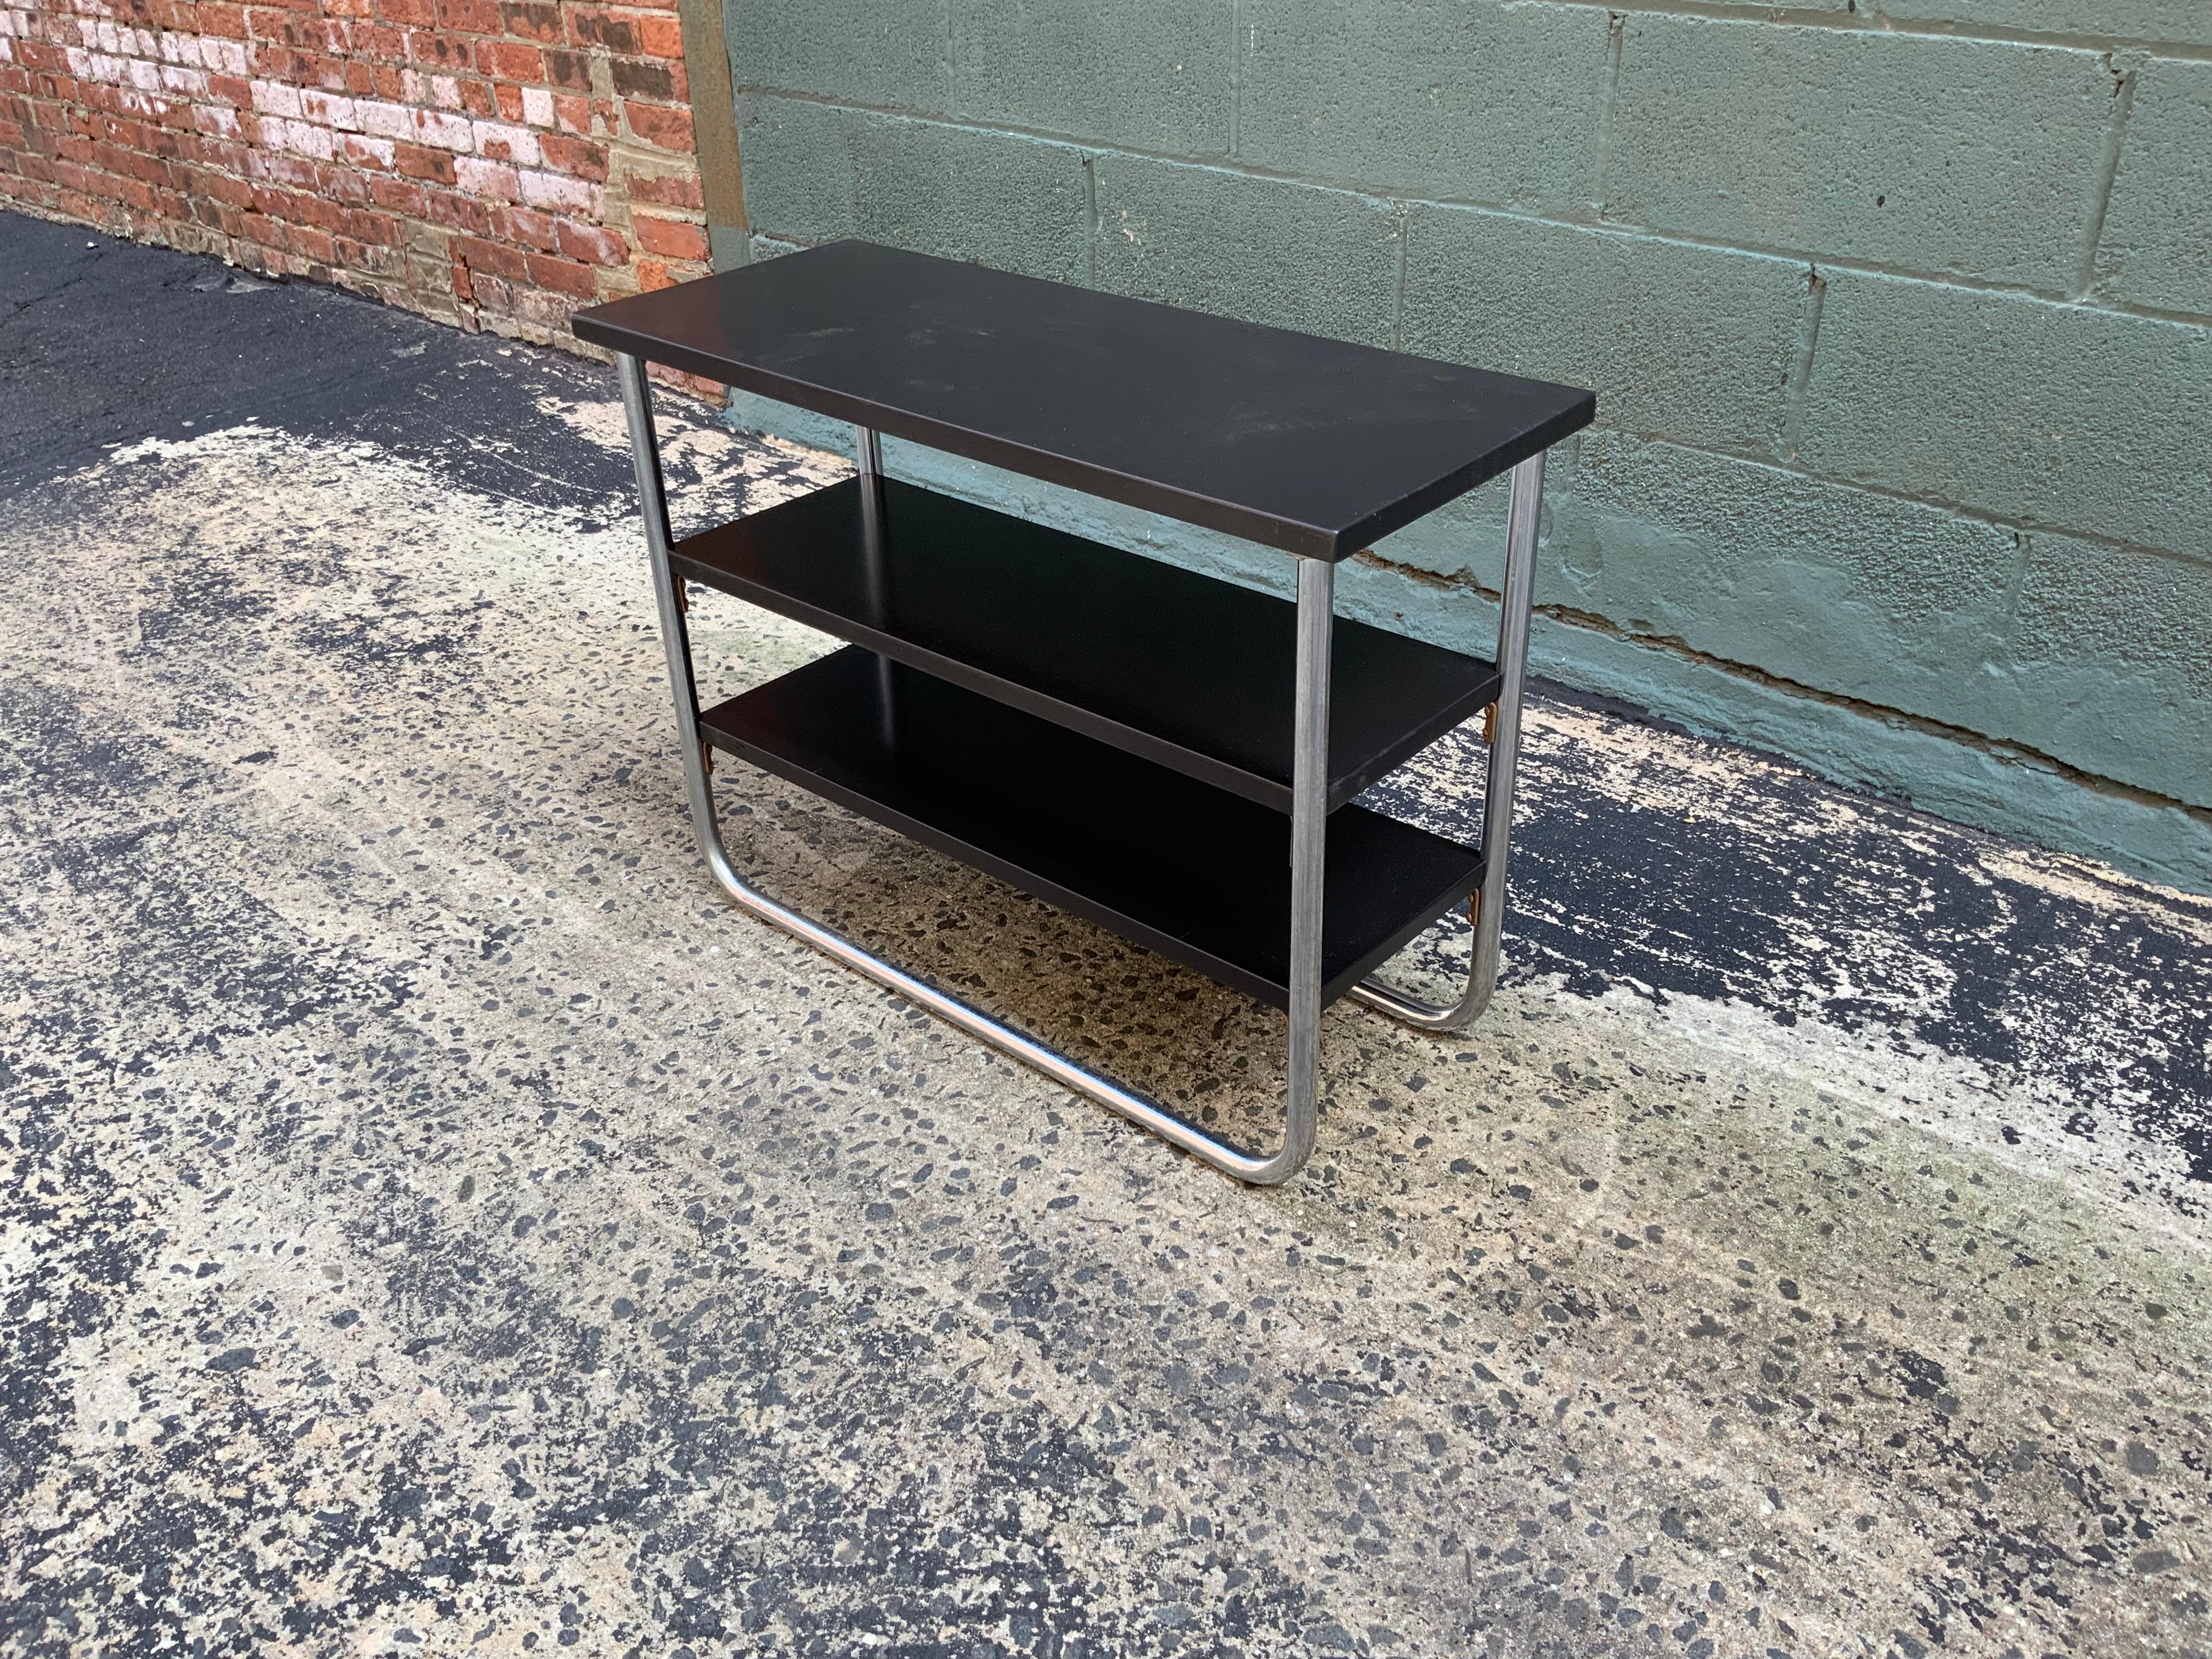 Tubular chrome and black lacquer three tiered table designed by Wolfgang Hoffman for Lloyd, circa 1930-1940.

Measures: 12” deep x 30” x 22” high.